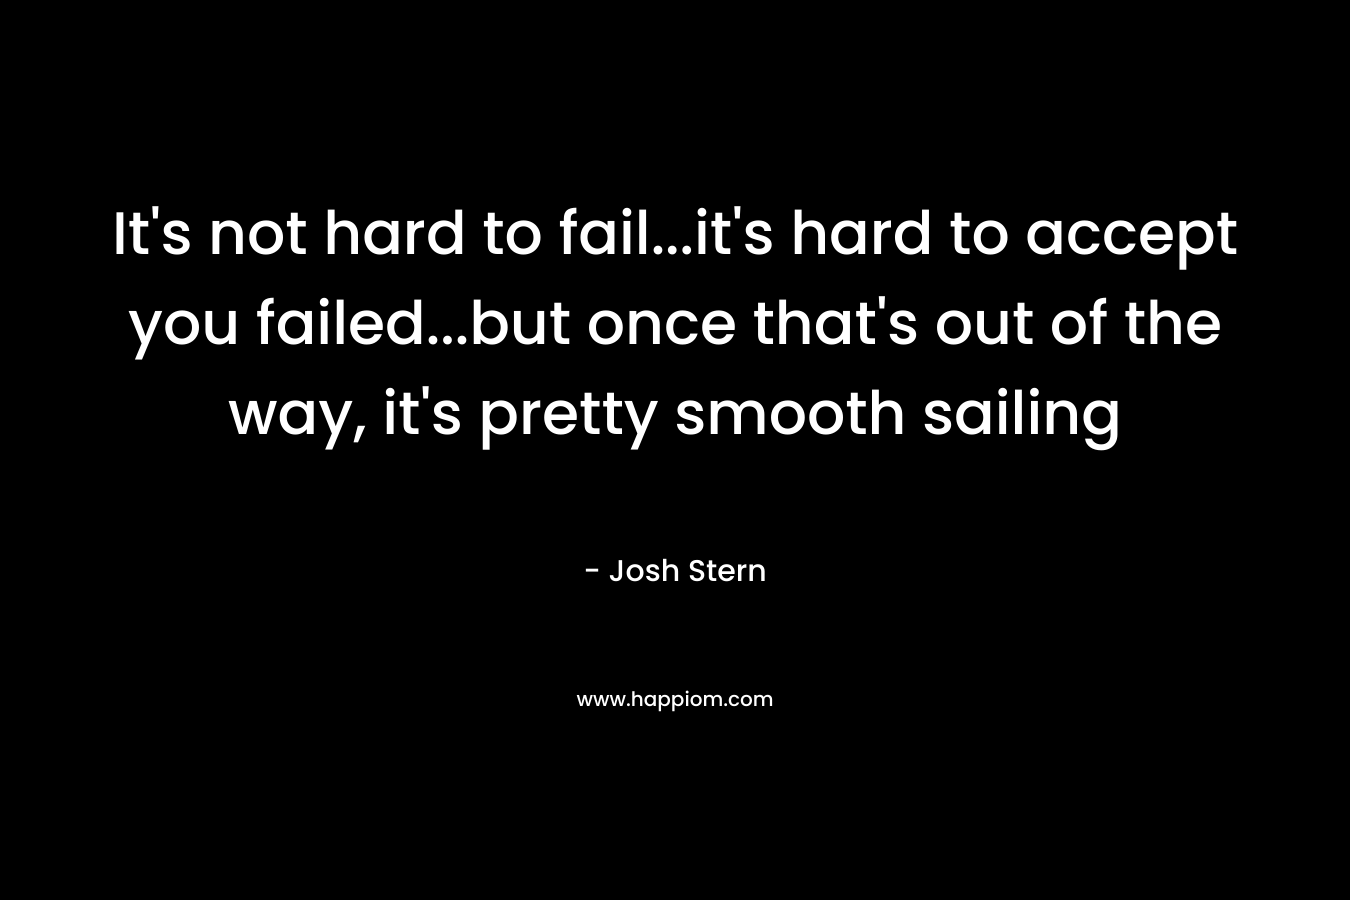 It's not hard to fail...it's hard to accept you failed...but once that's out of the way, it's pretty smooth sailing